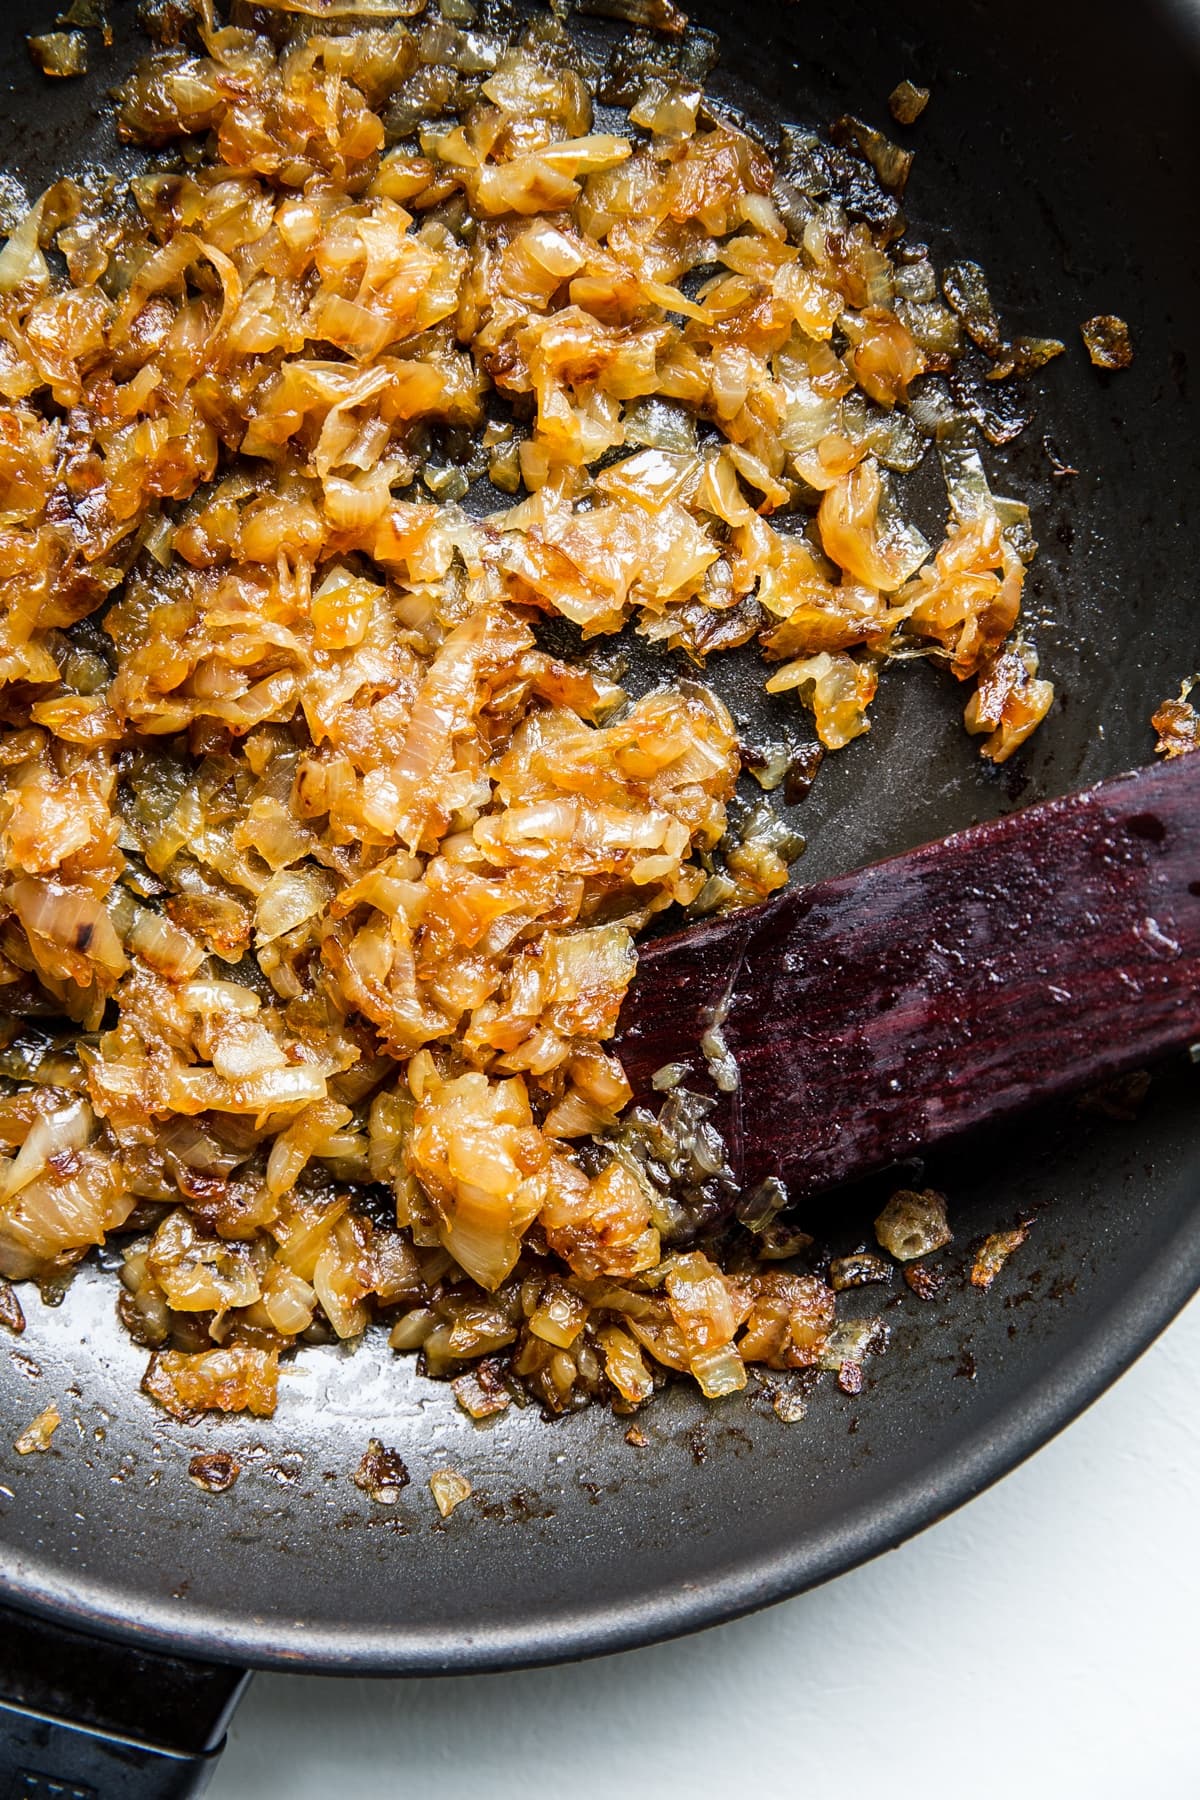 Caramelized Onions in a pan